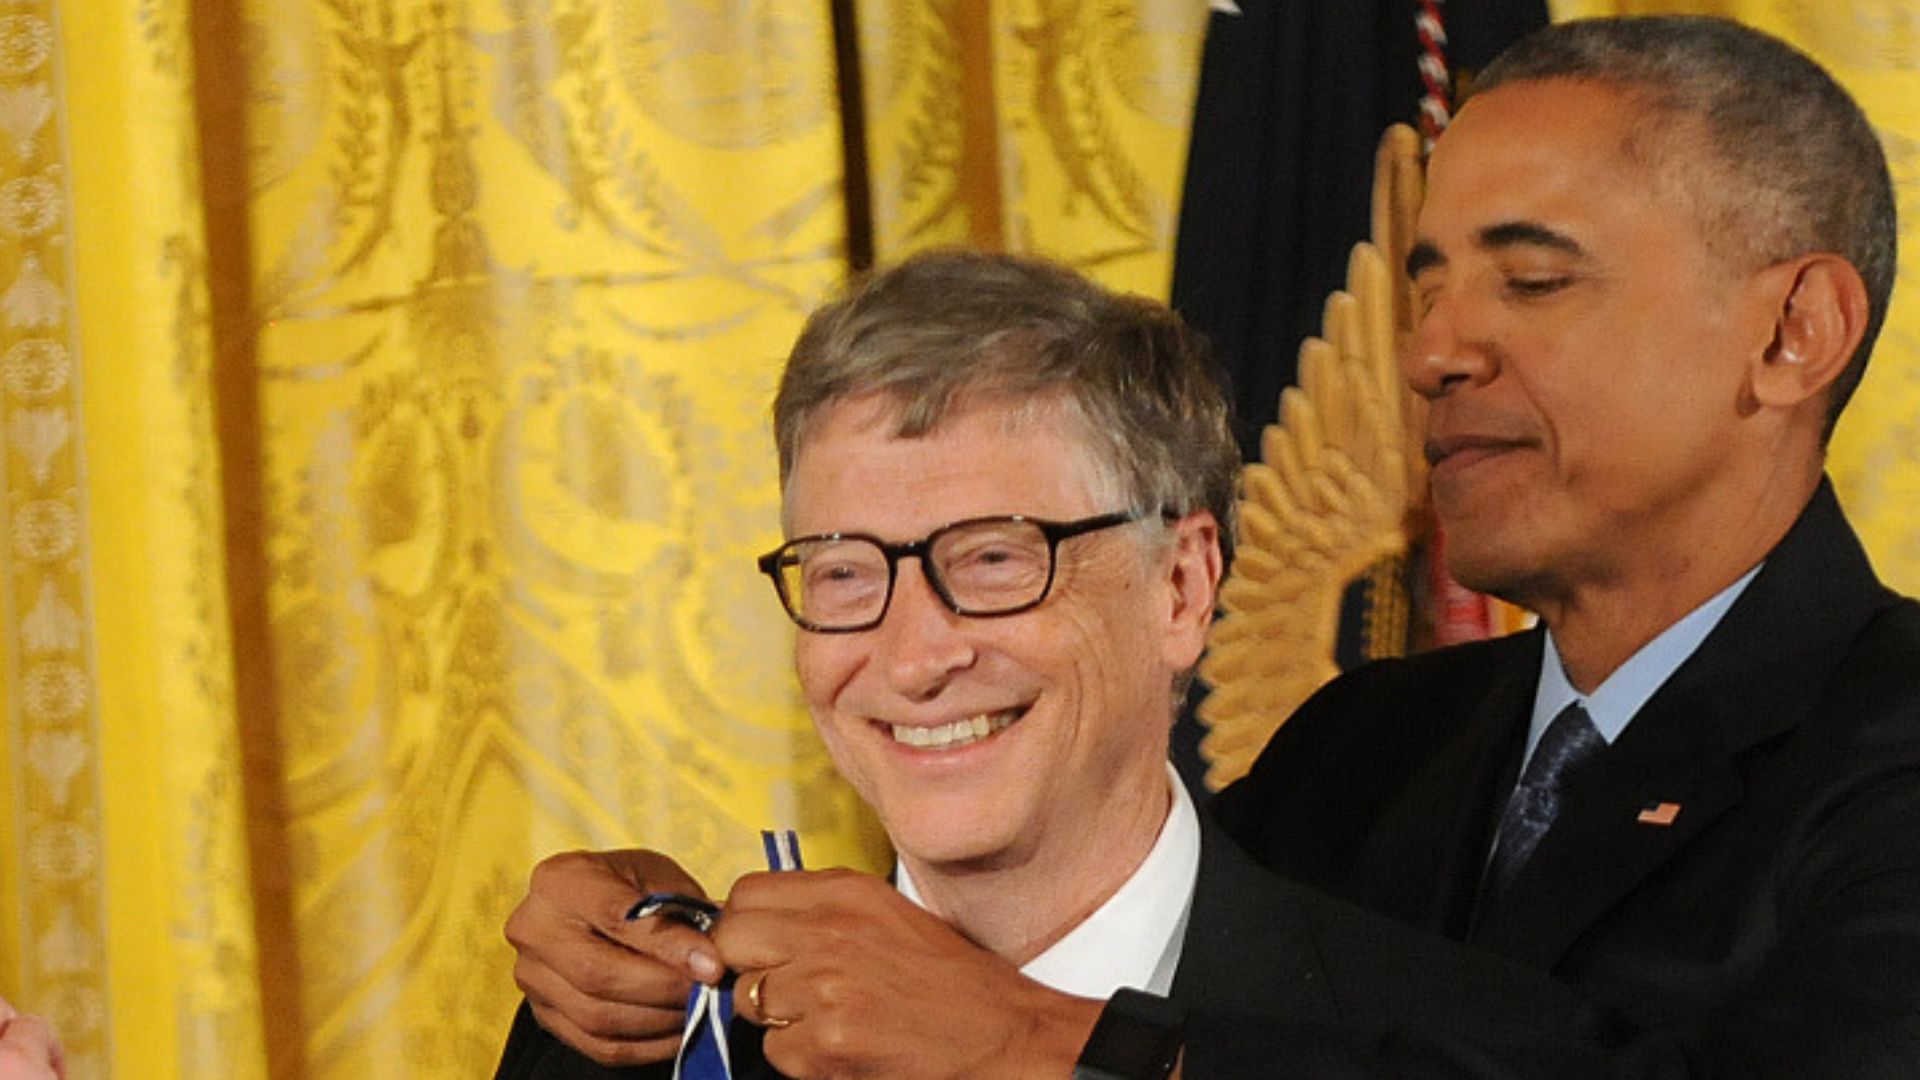 Barack Obama uses his dominant left hand to tie the ribbon of fellow southpaw Bill Gates's Medal of Freedom. /Paul Hennessy/Polaris